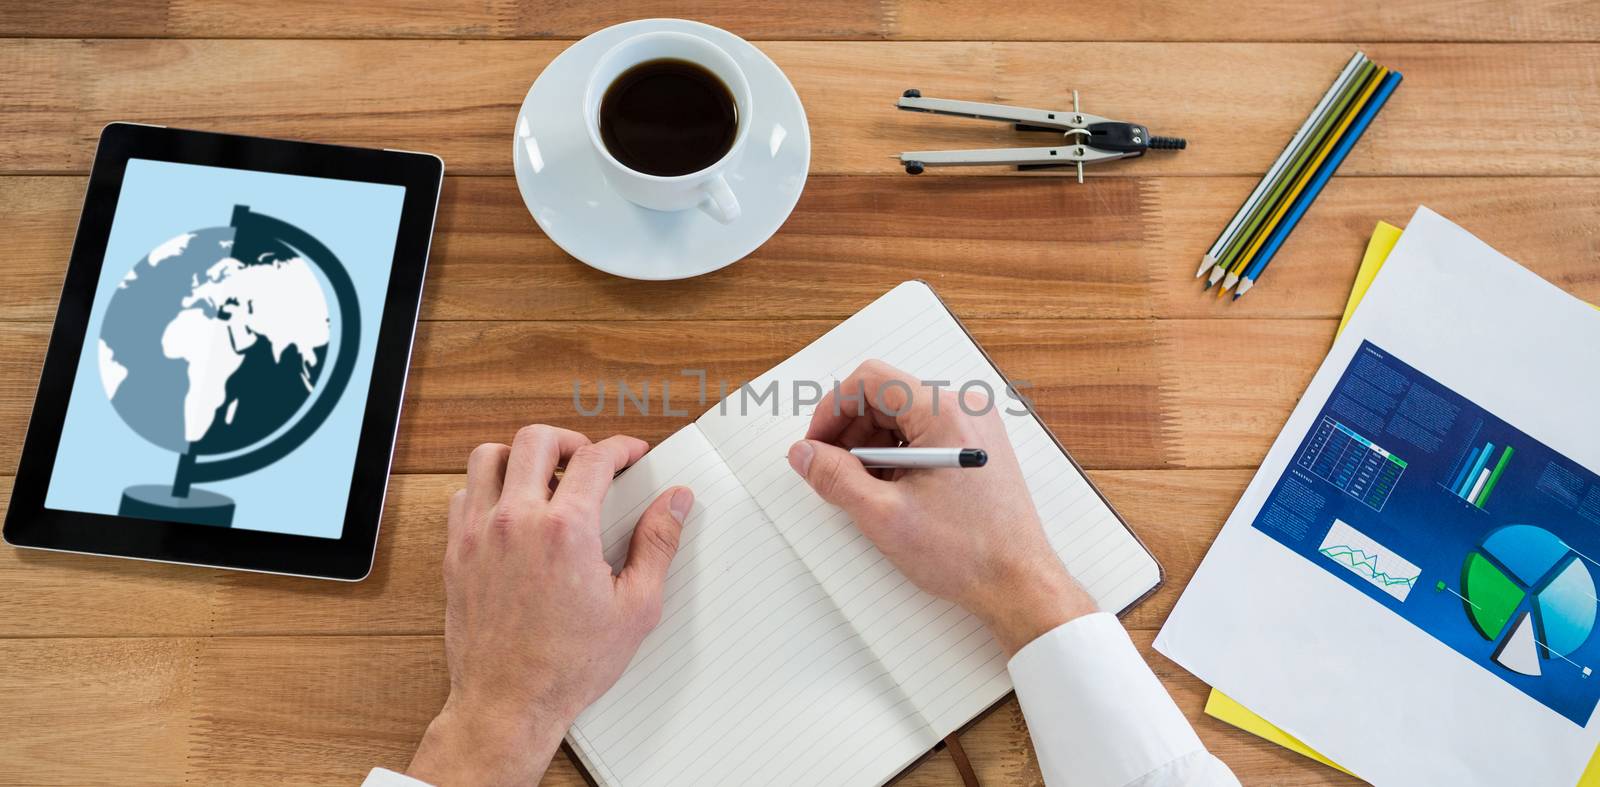 Print against businessman working at his desk